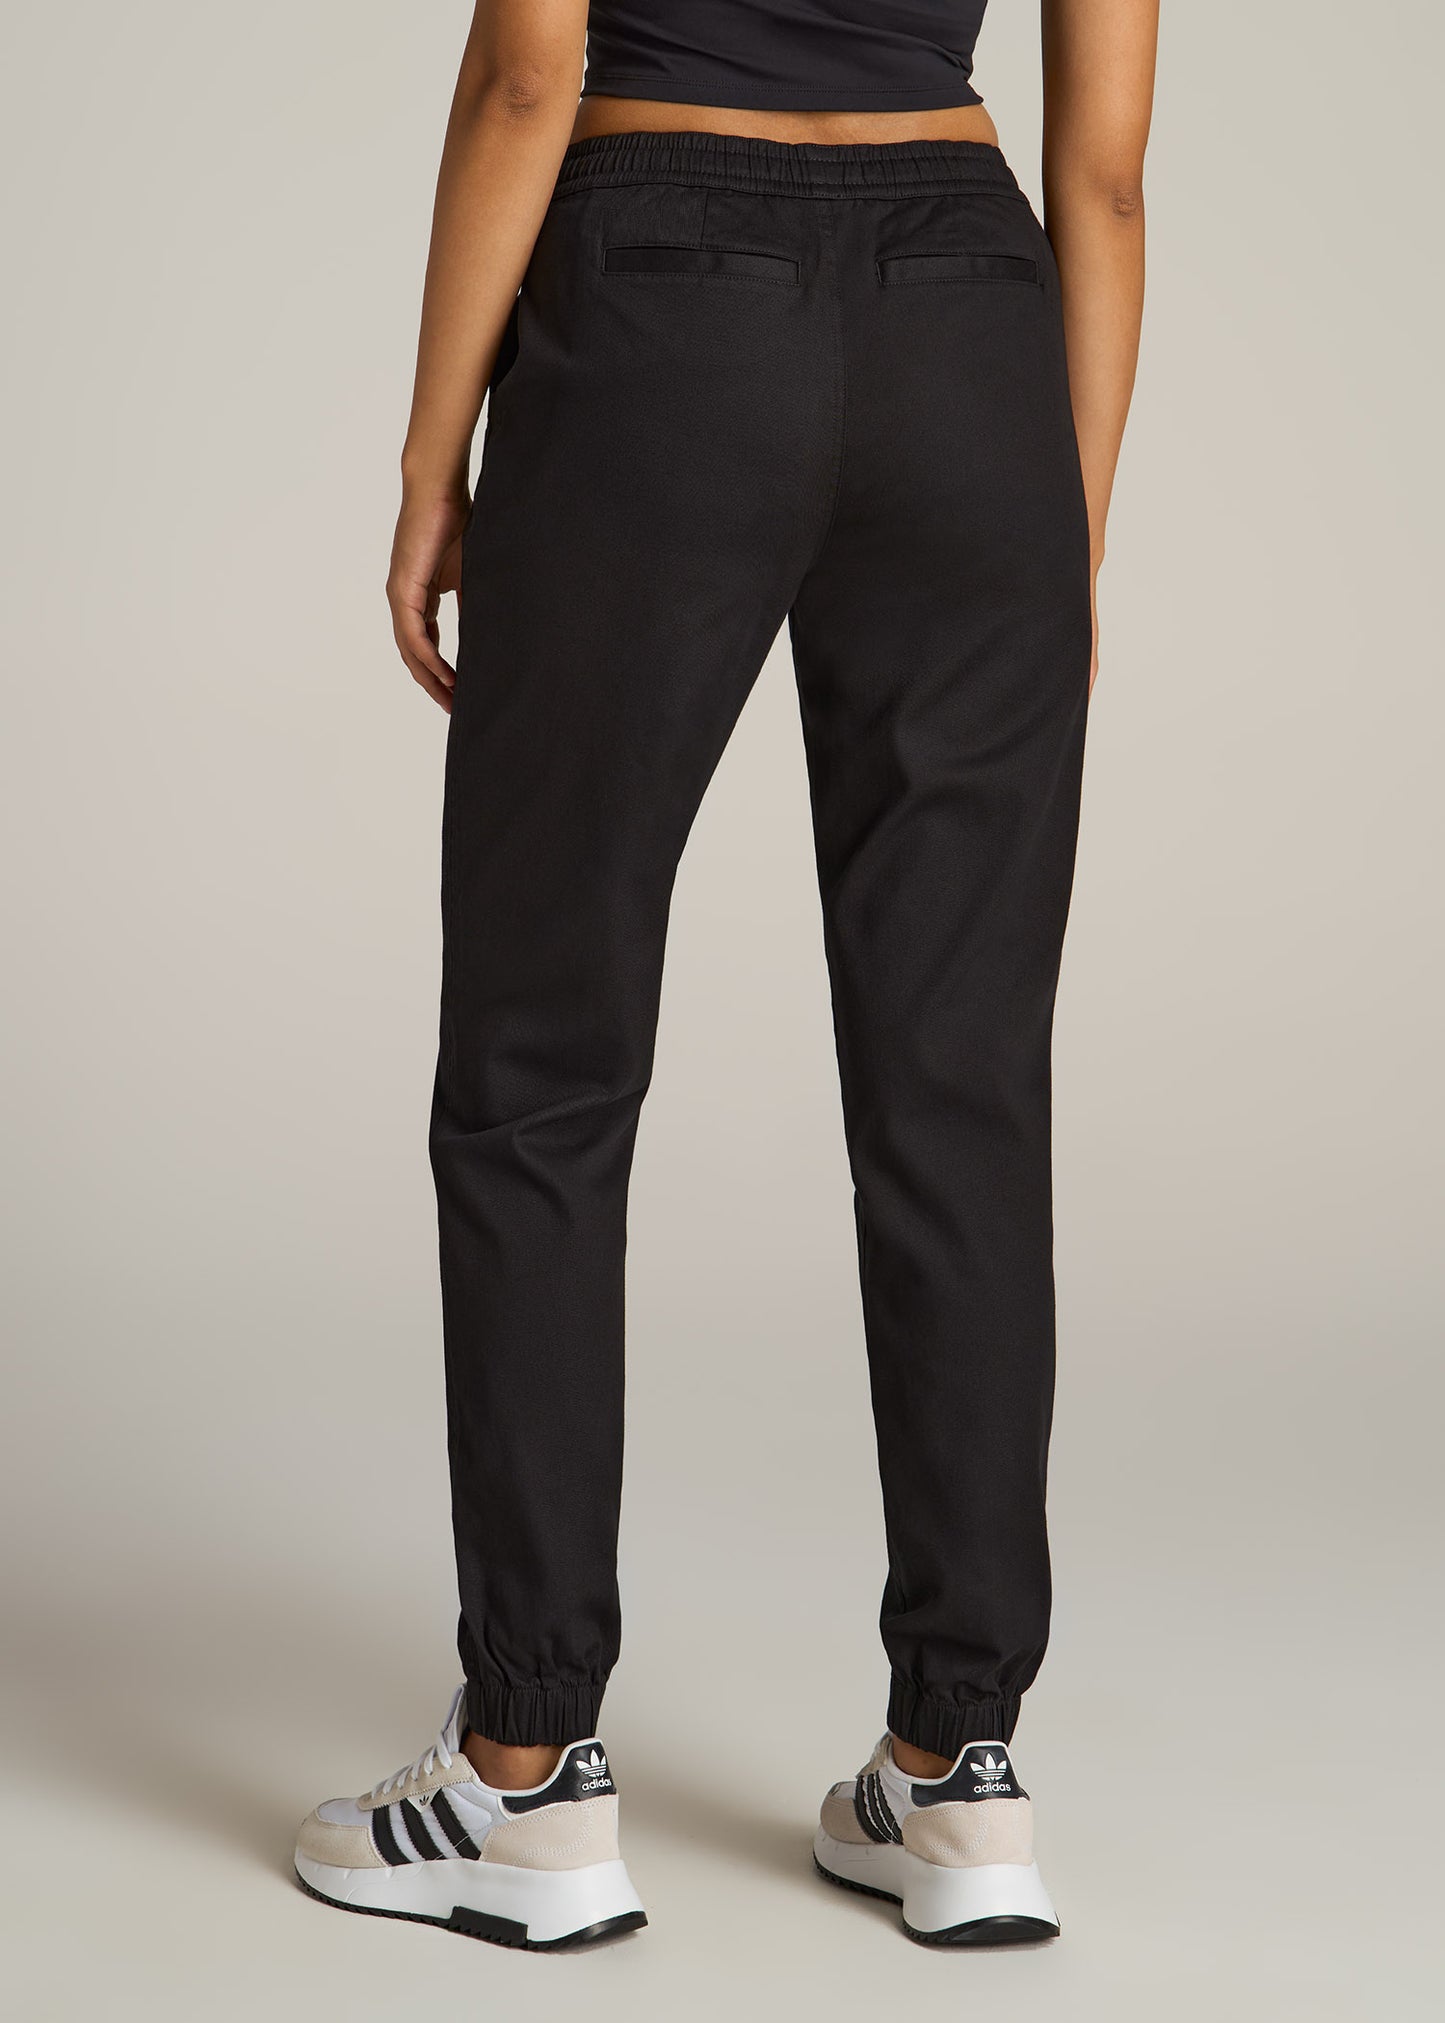 Twill Jogger Pants for Tall Women